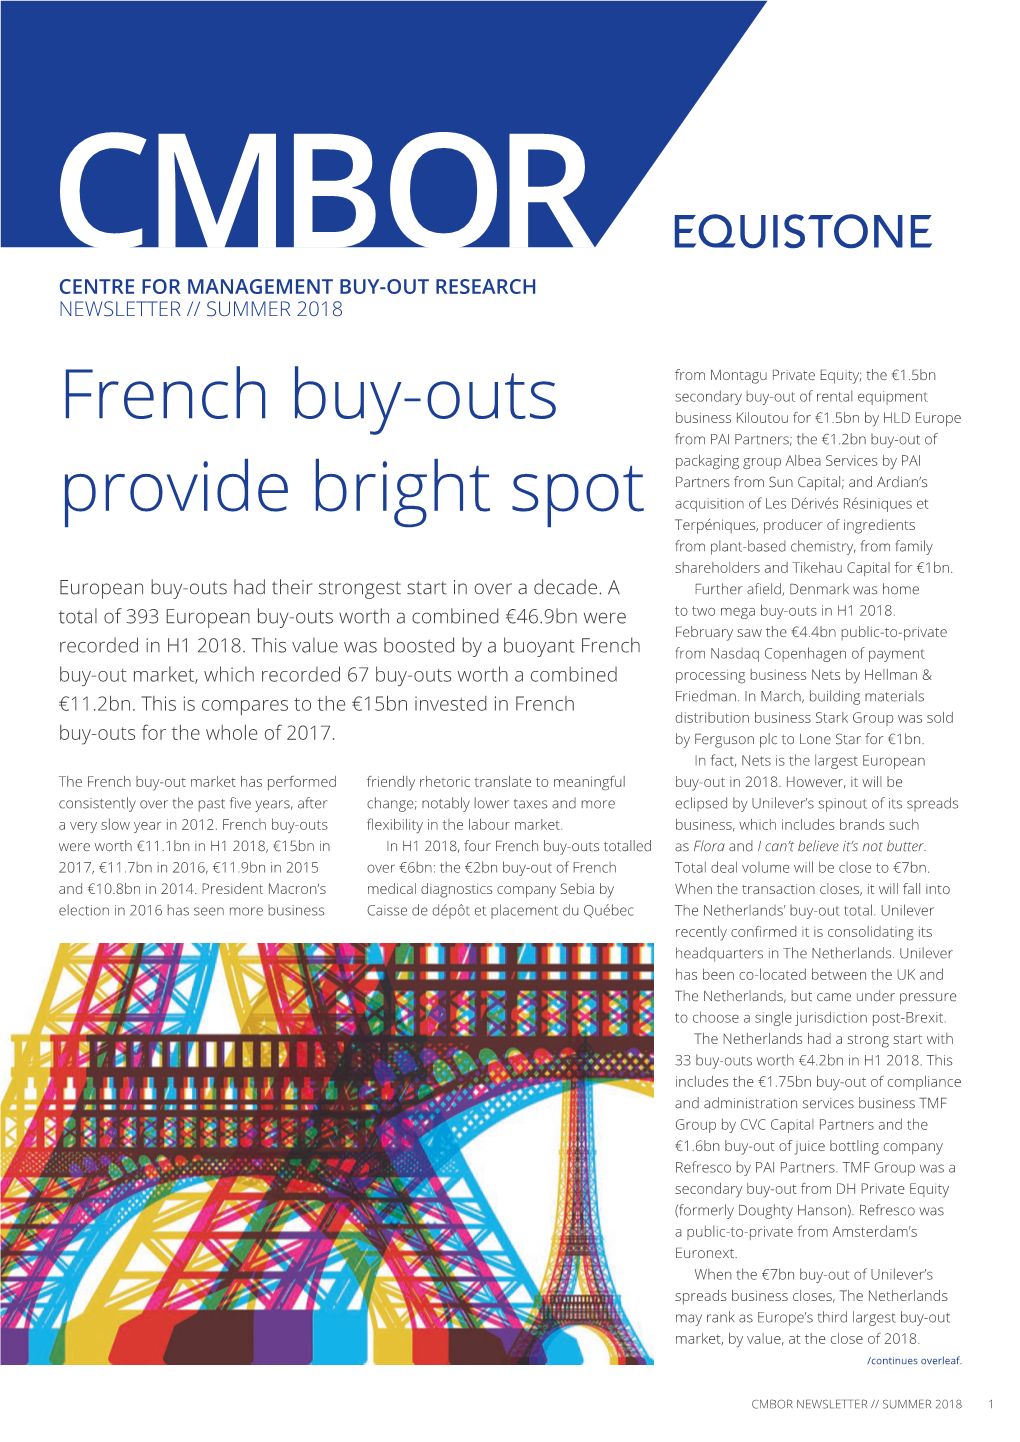 French Buy-Outs Provide Bright Spot